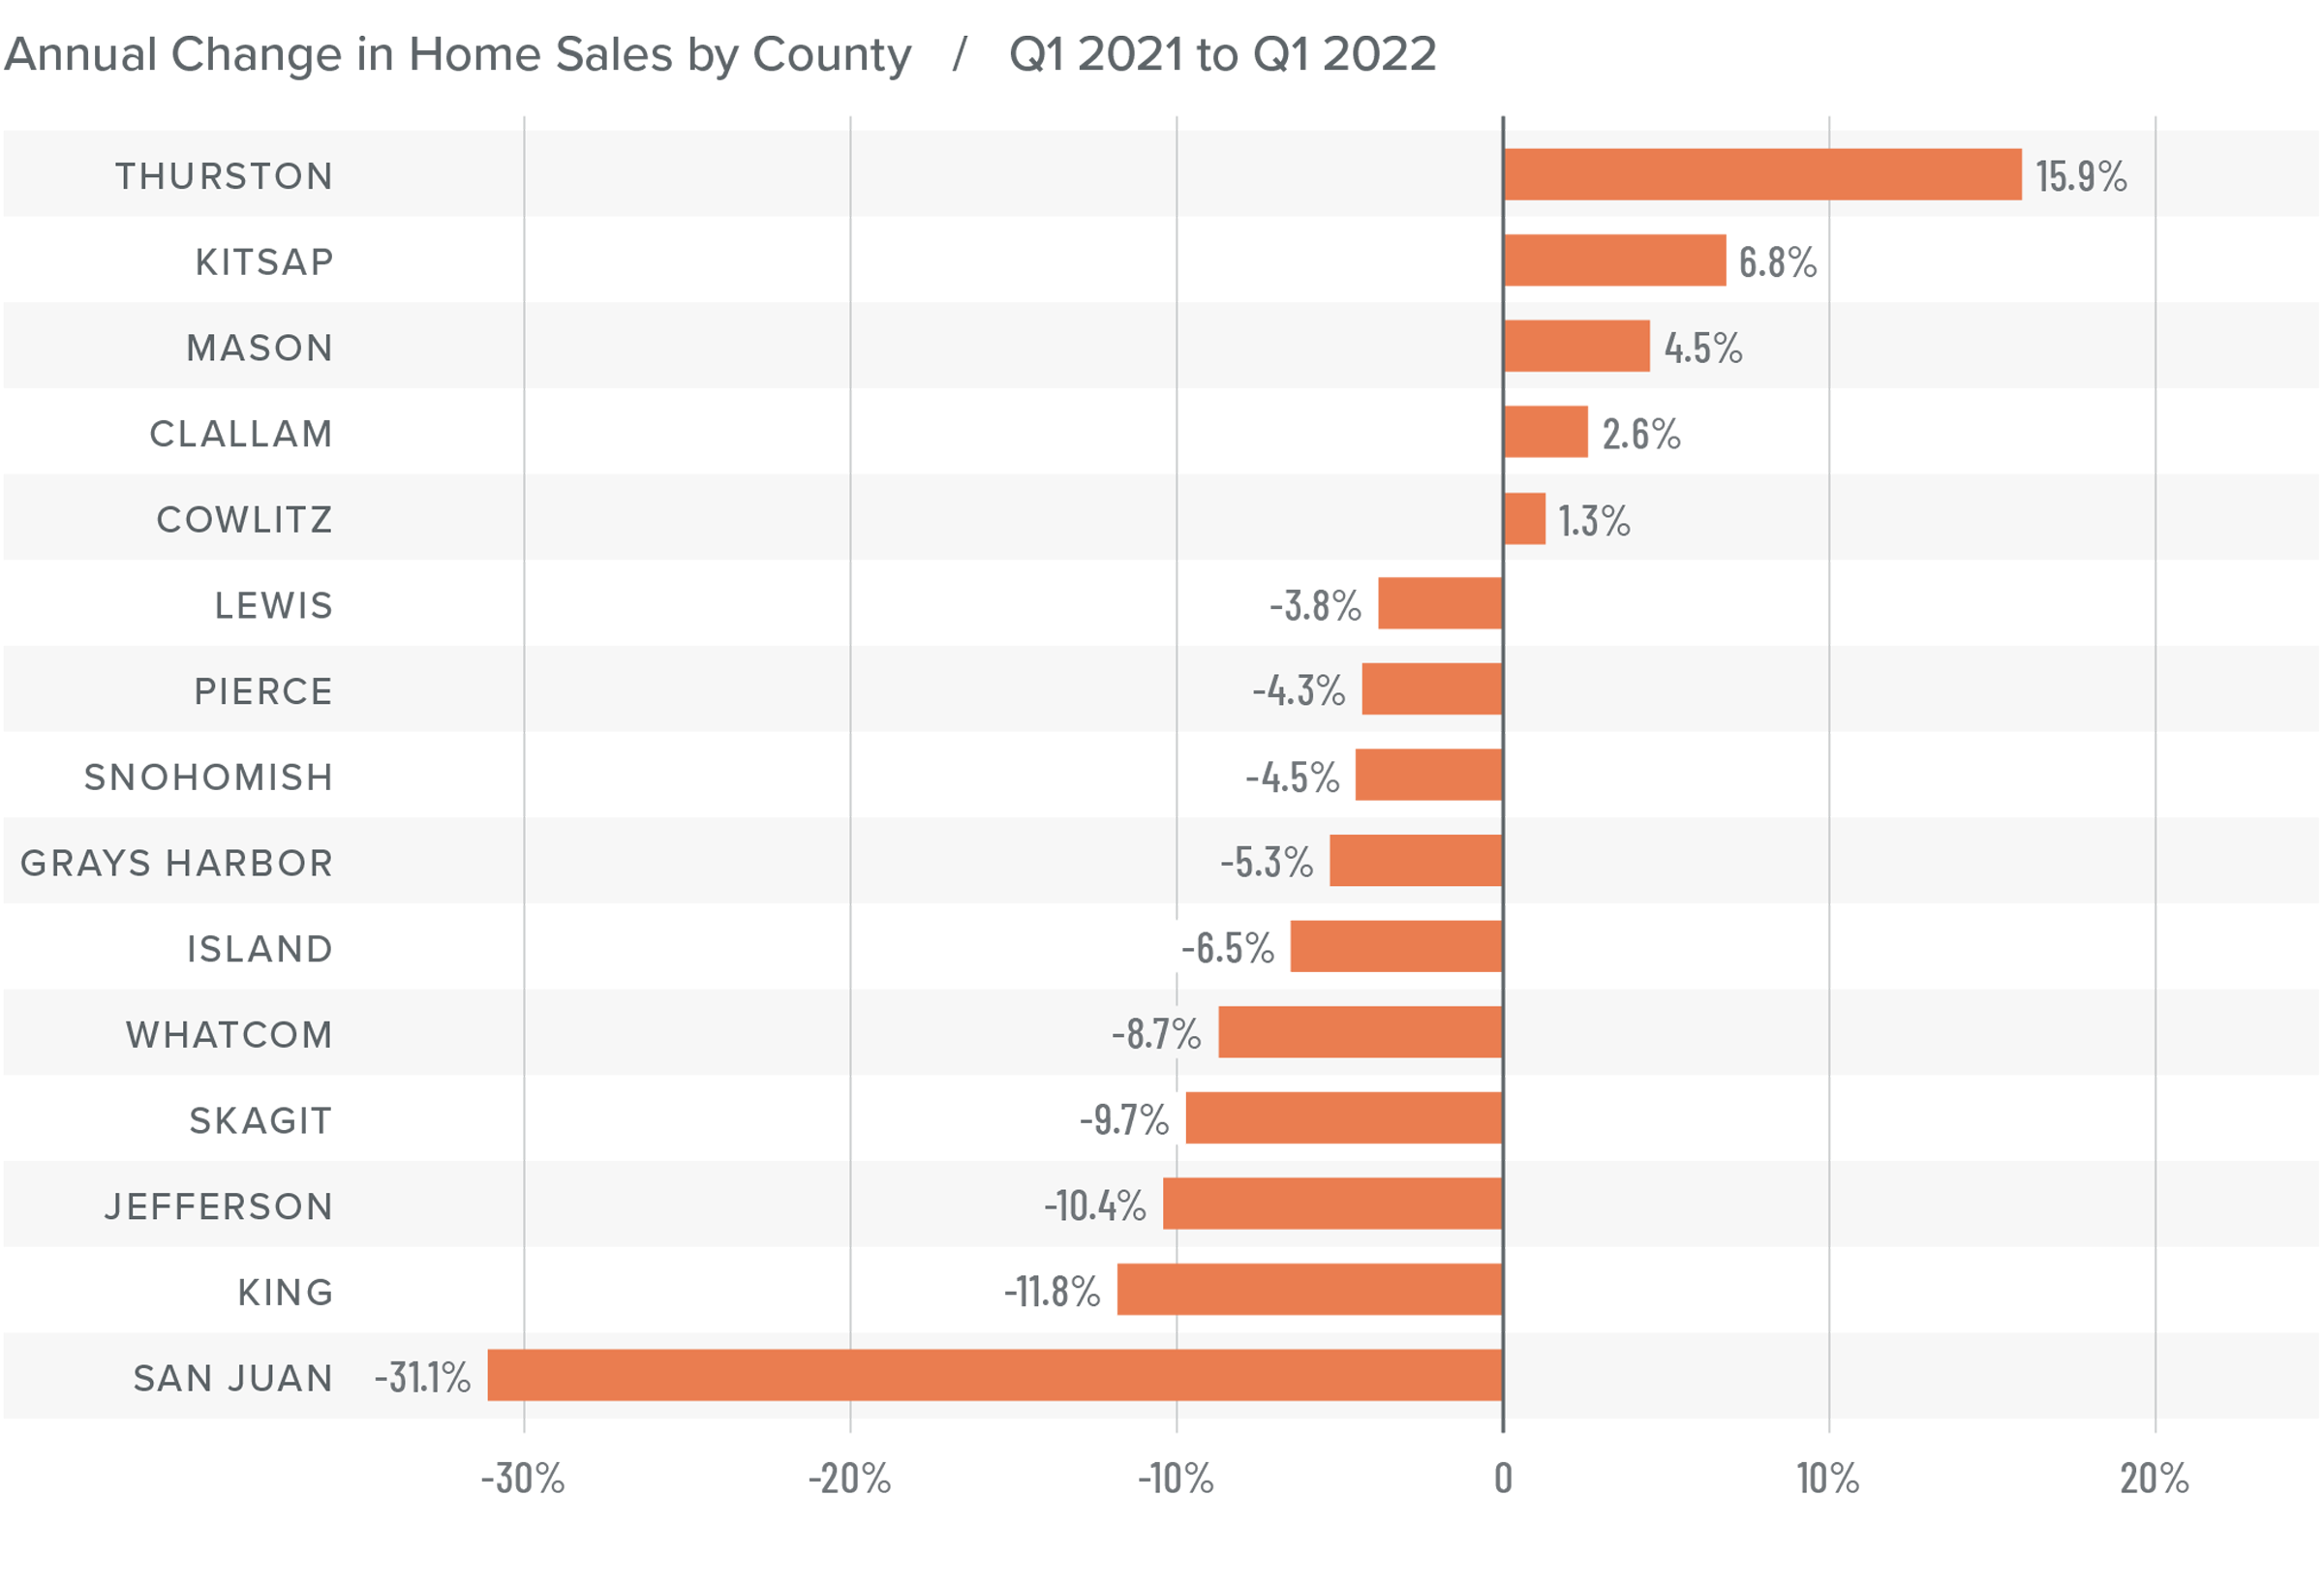 A bar graph showing the annual change in home sales for various counties in Western Washington between Q1 2021 and Q1 2022.